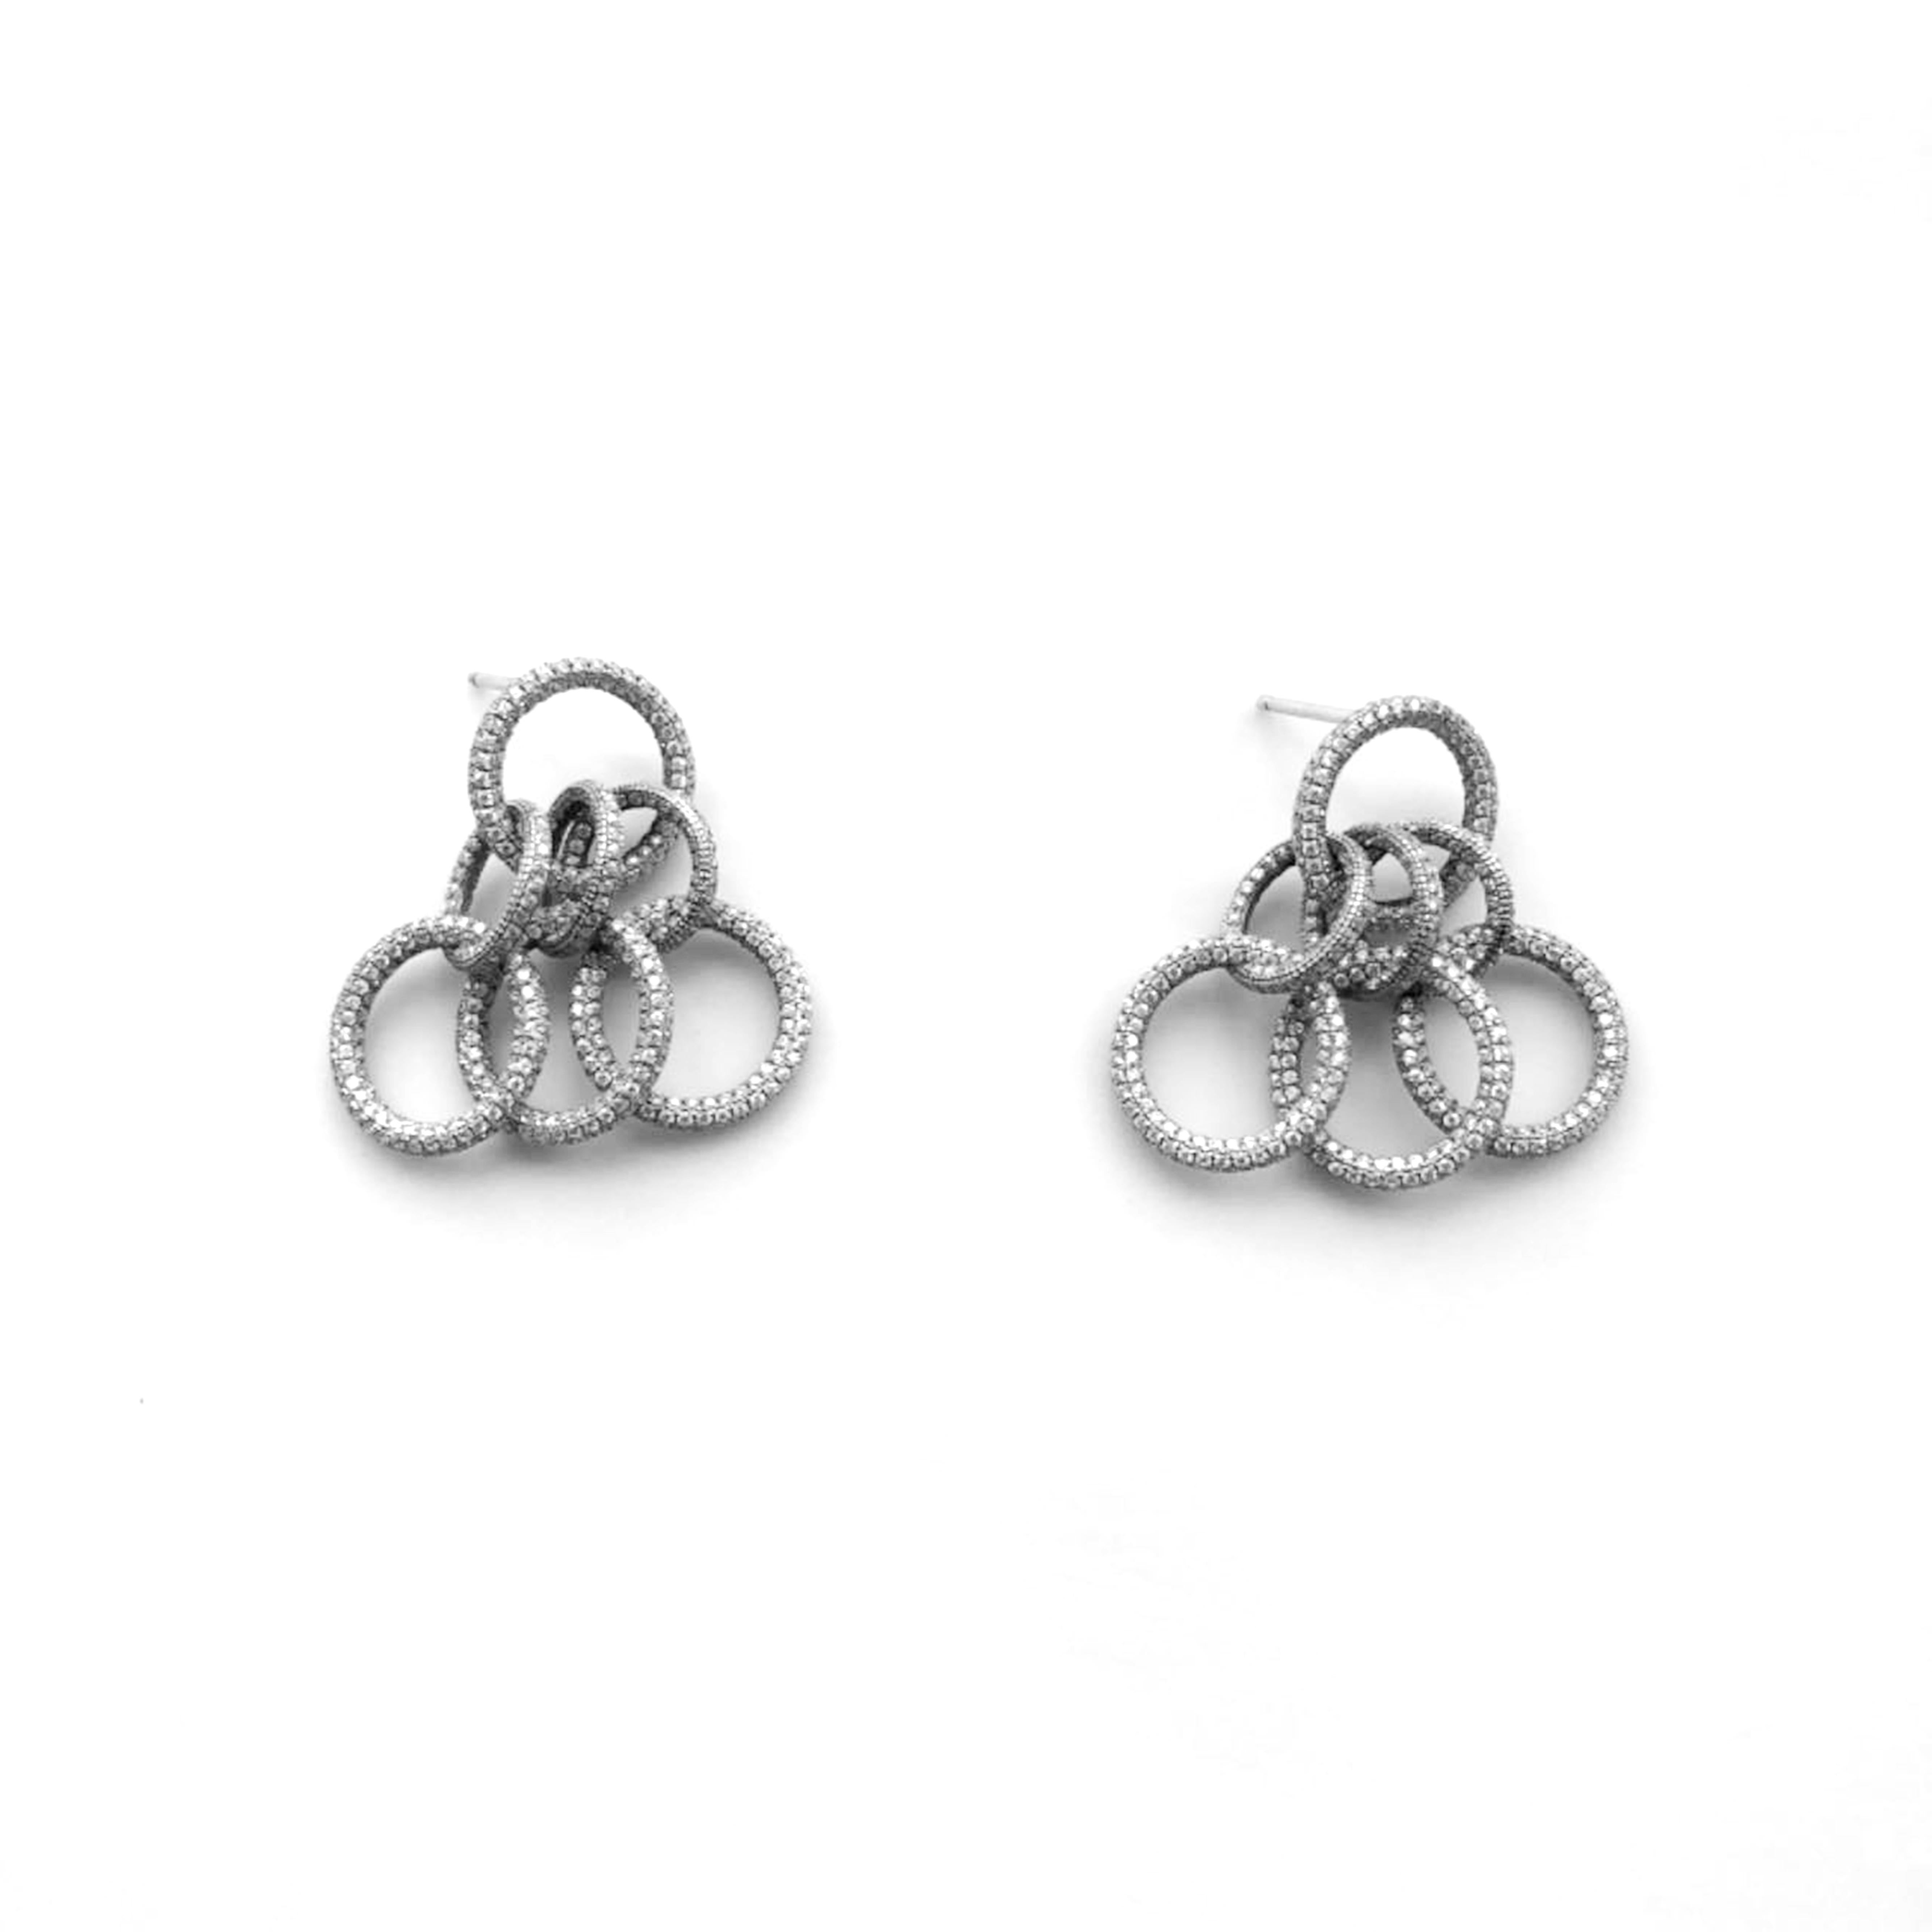 Traditional diamonds meet contemporary style .

X Cosmos. 
The balance between light and shadow , motion and solemn.

Made of 5.87crt D color diamonds with 18K white gold , with our top craftmanship AtelierX present your ideal earring collection for